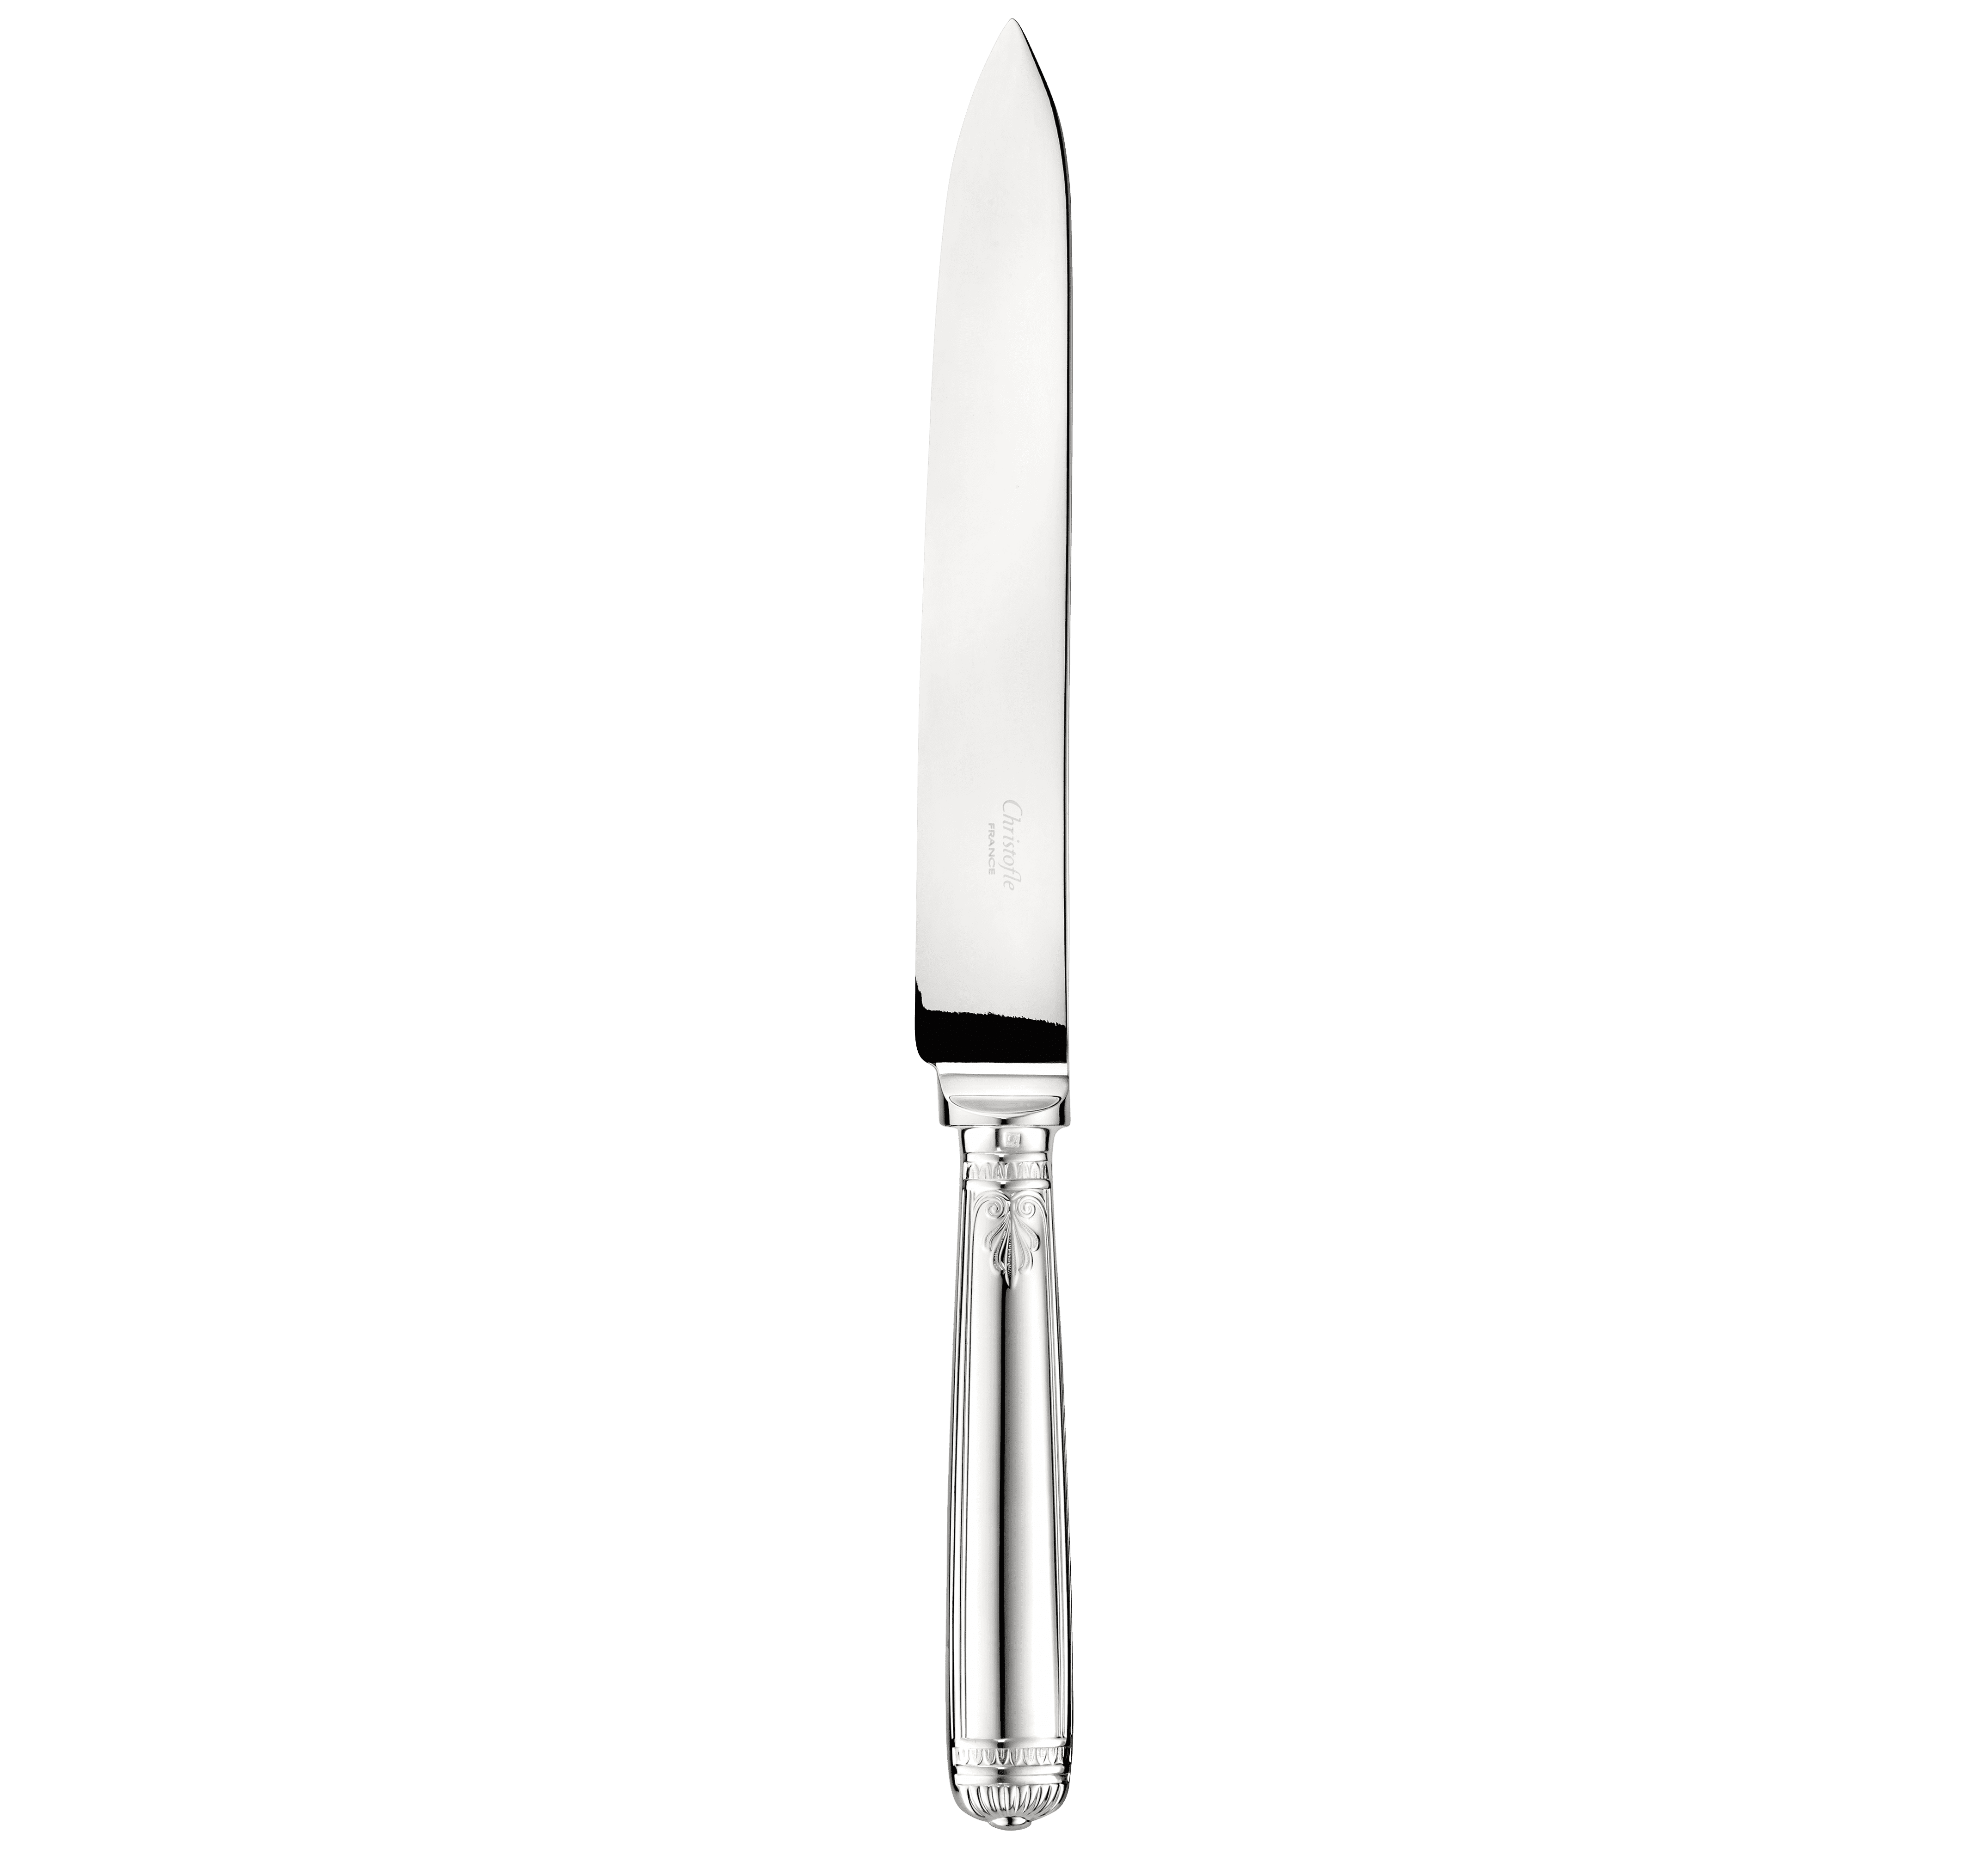 Malmaison Silver-Plated Carving Knife